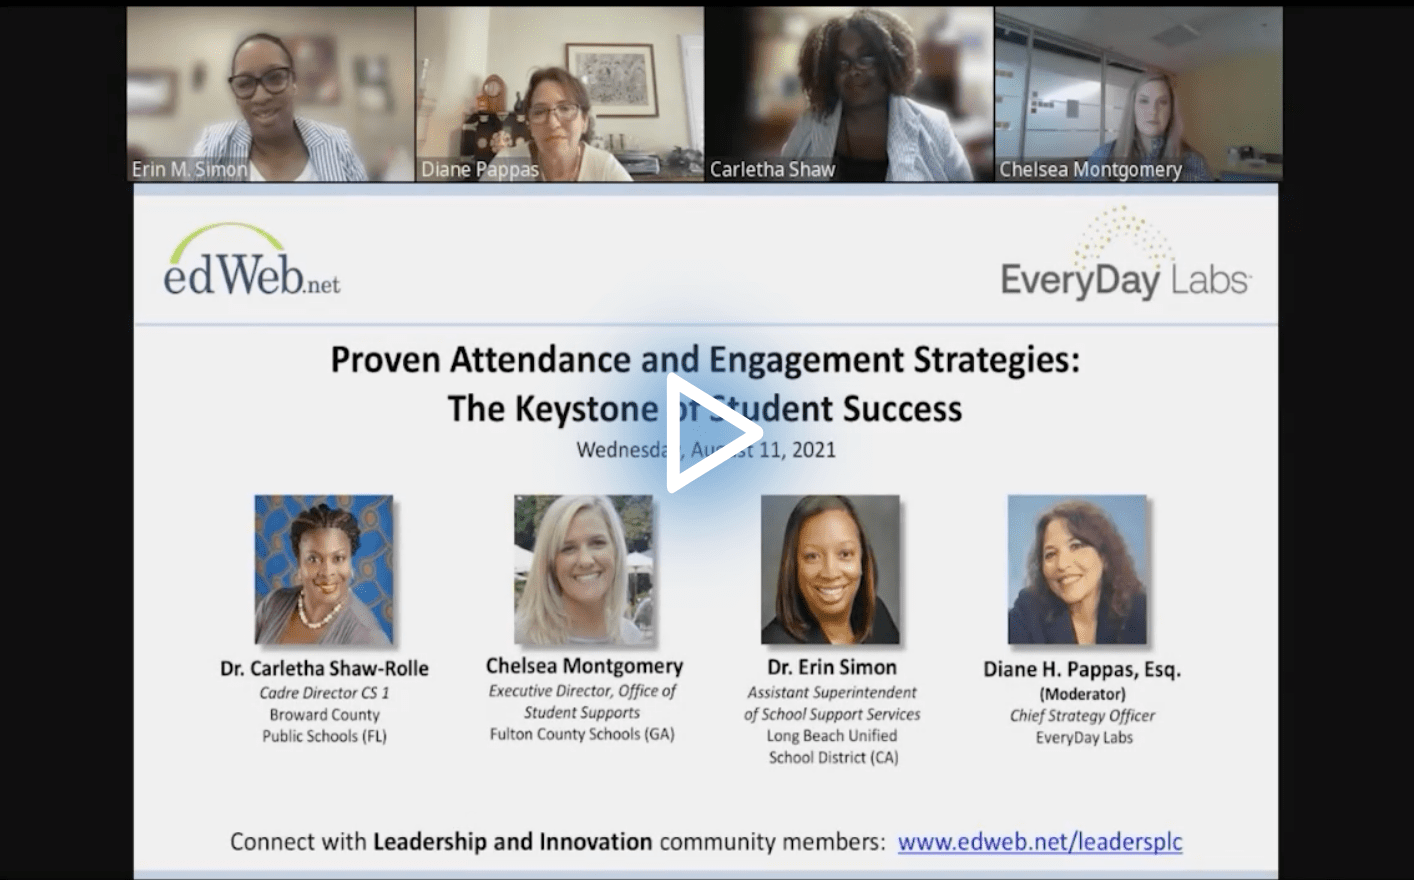 Proven Attendance and Engagement Strategies: The Keystone of Student Success edLeader Panel recording link